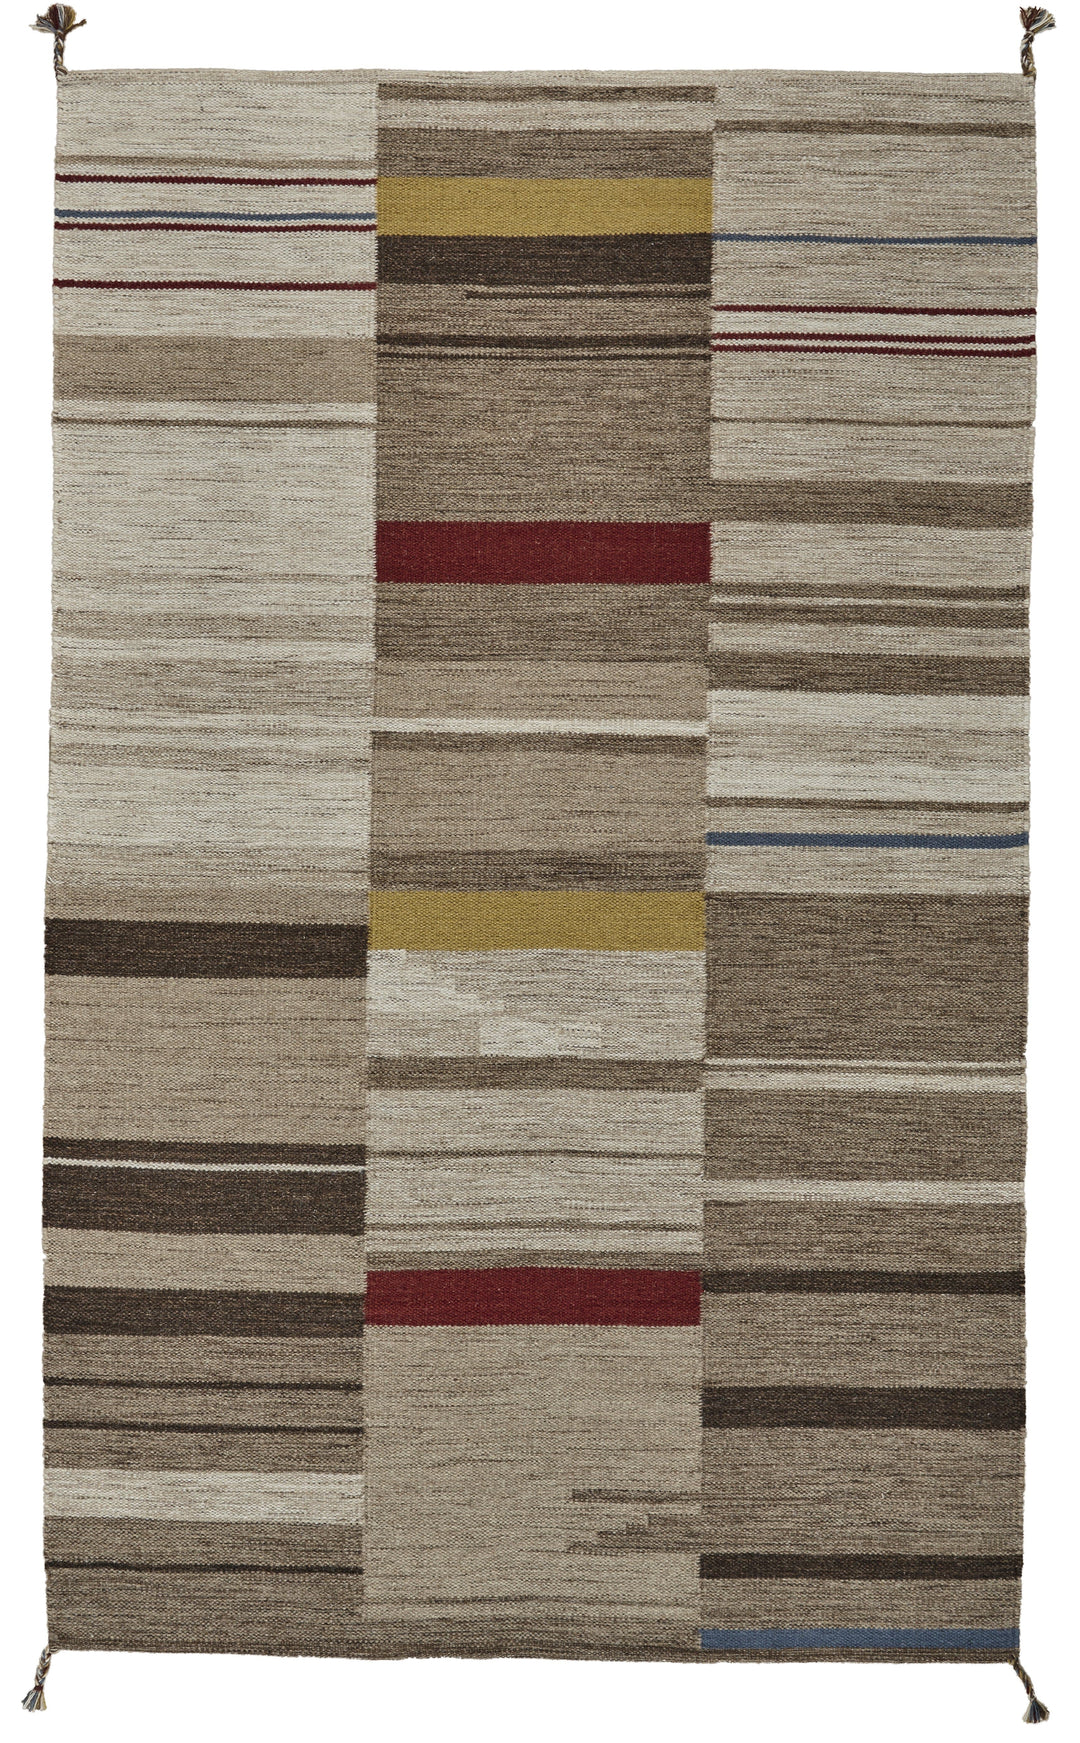 Feizy Feizy Brampton Tribal Boho Wool Flatweave Rug - Taupe & Dark Red - Available in 4 Sizes